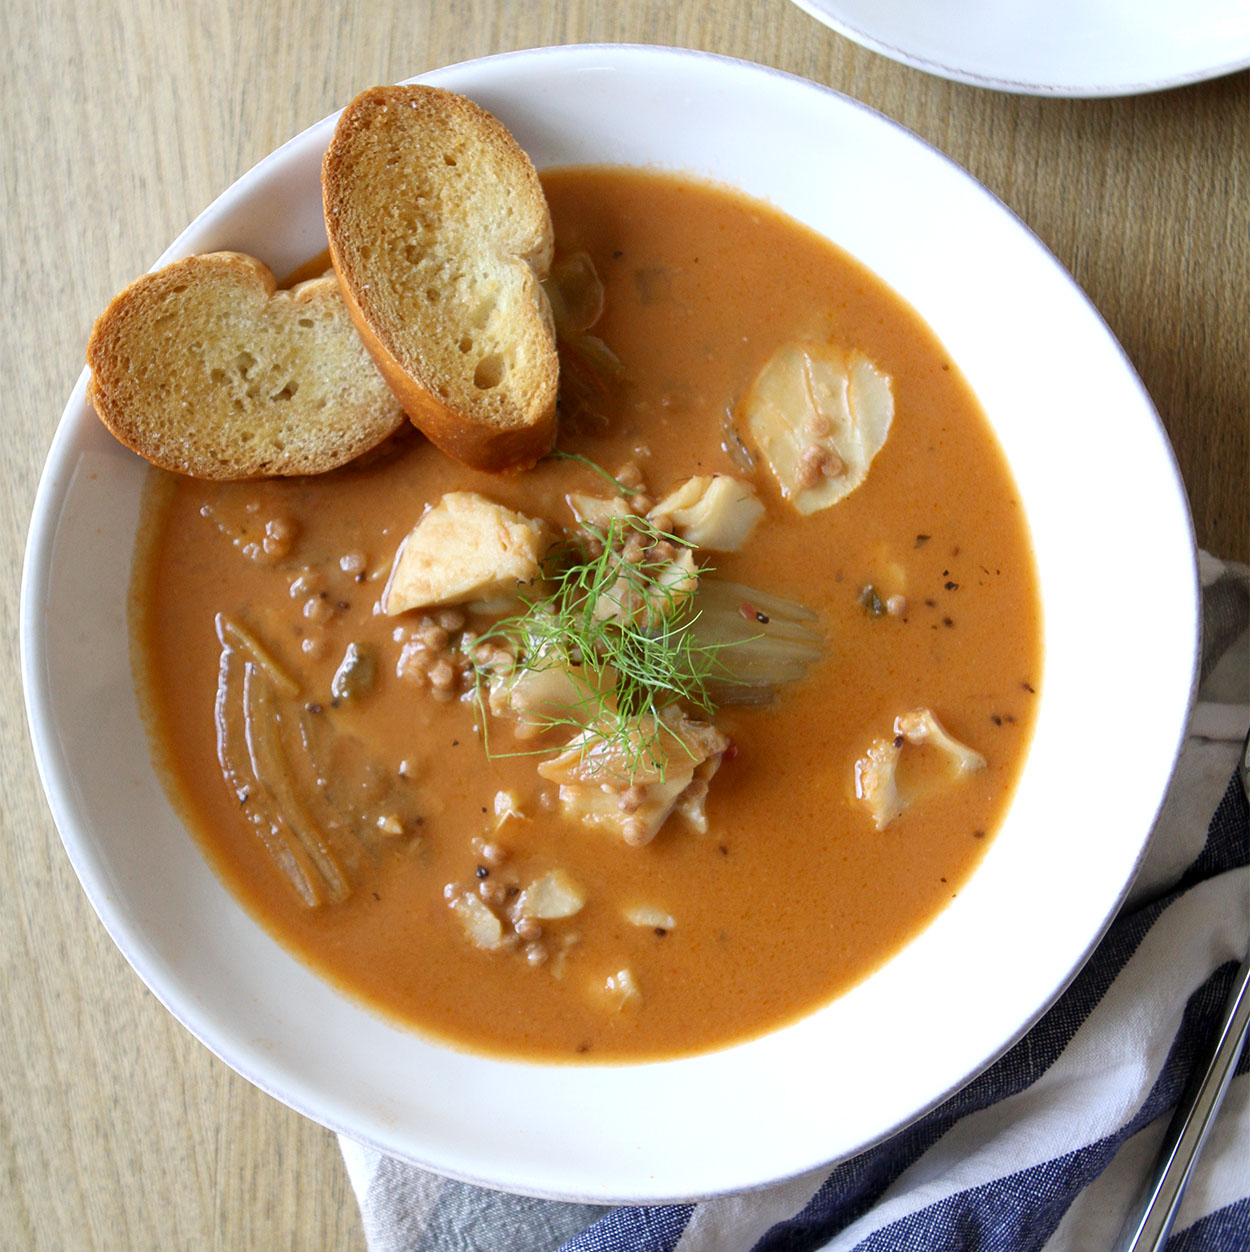 A white bowl of slow cooker fish stew, garnished with fennel frans and two crostini